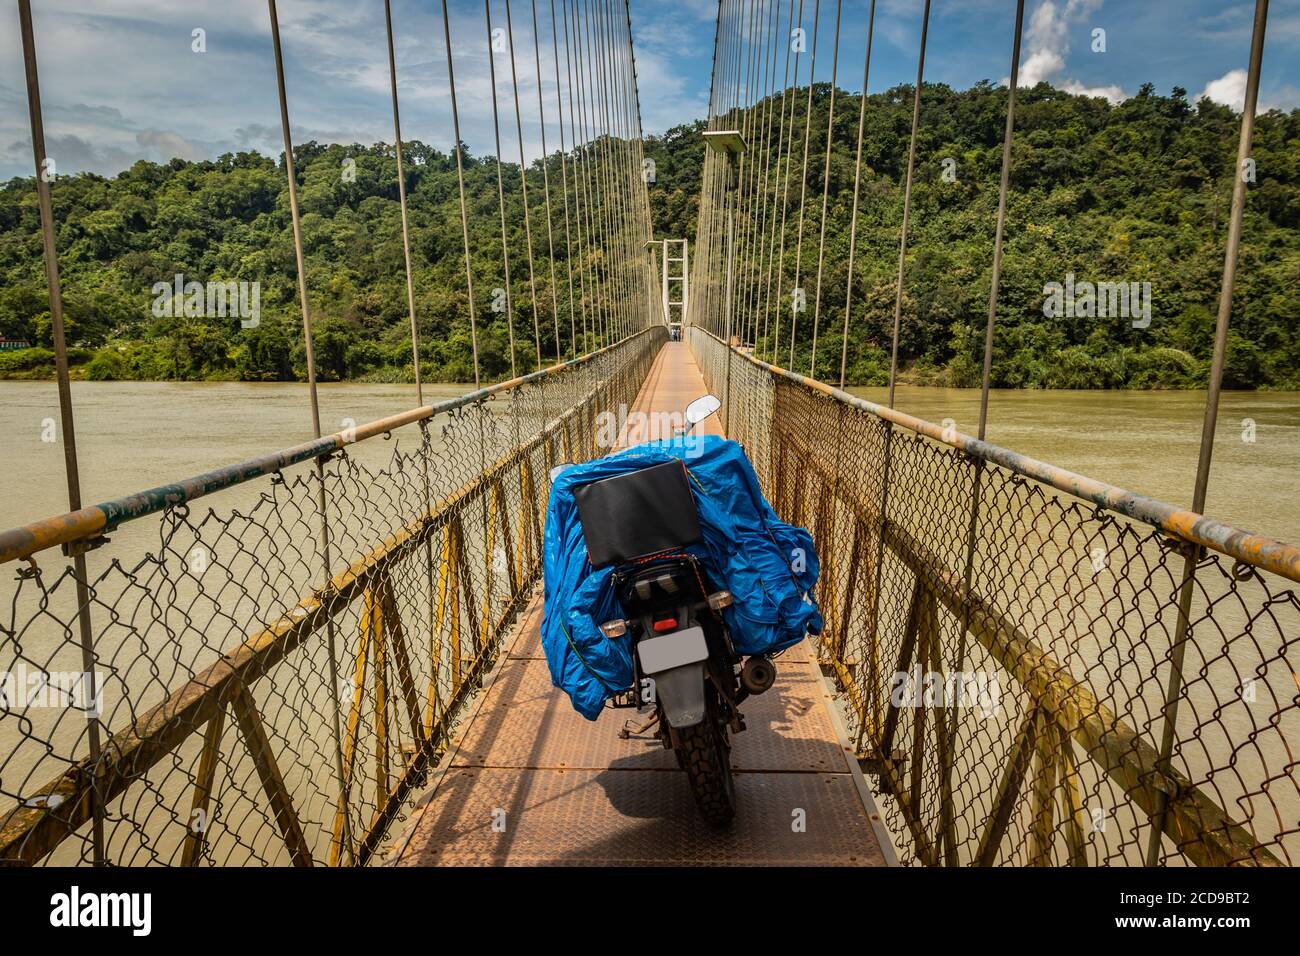 solo rider loaded motorcycle parked isolated on suspension bridge image is taken at honnavar karnataka india. it is an amazing experience to ride moto Stock Photo